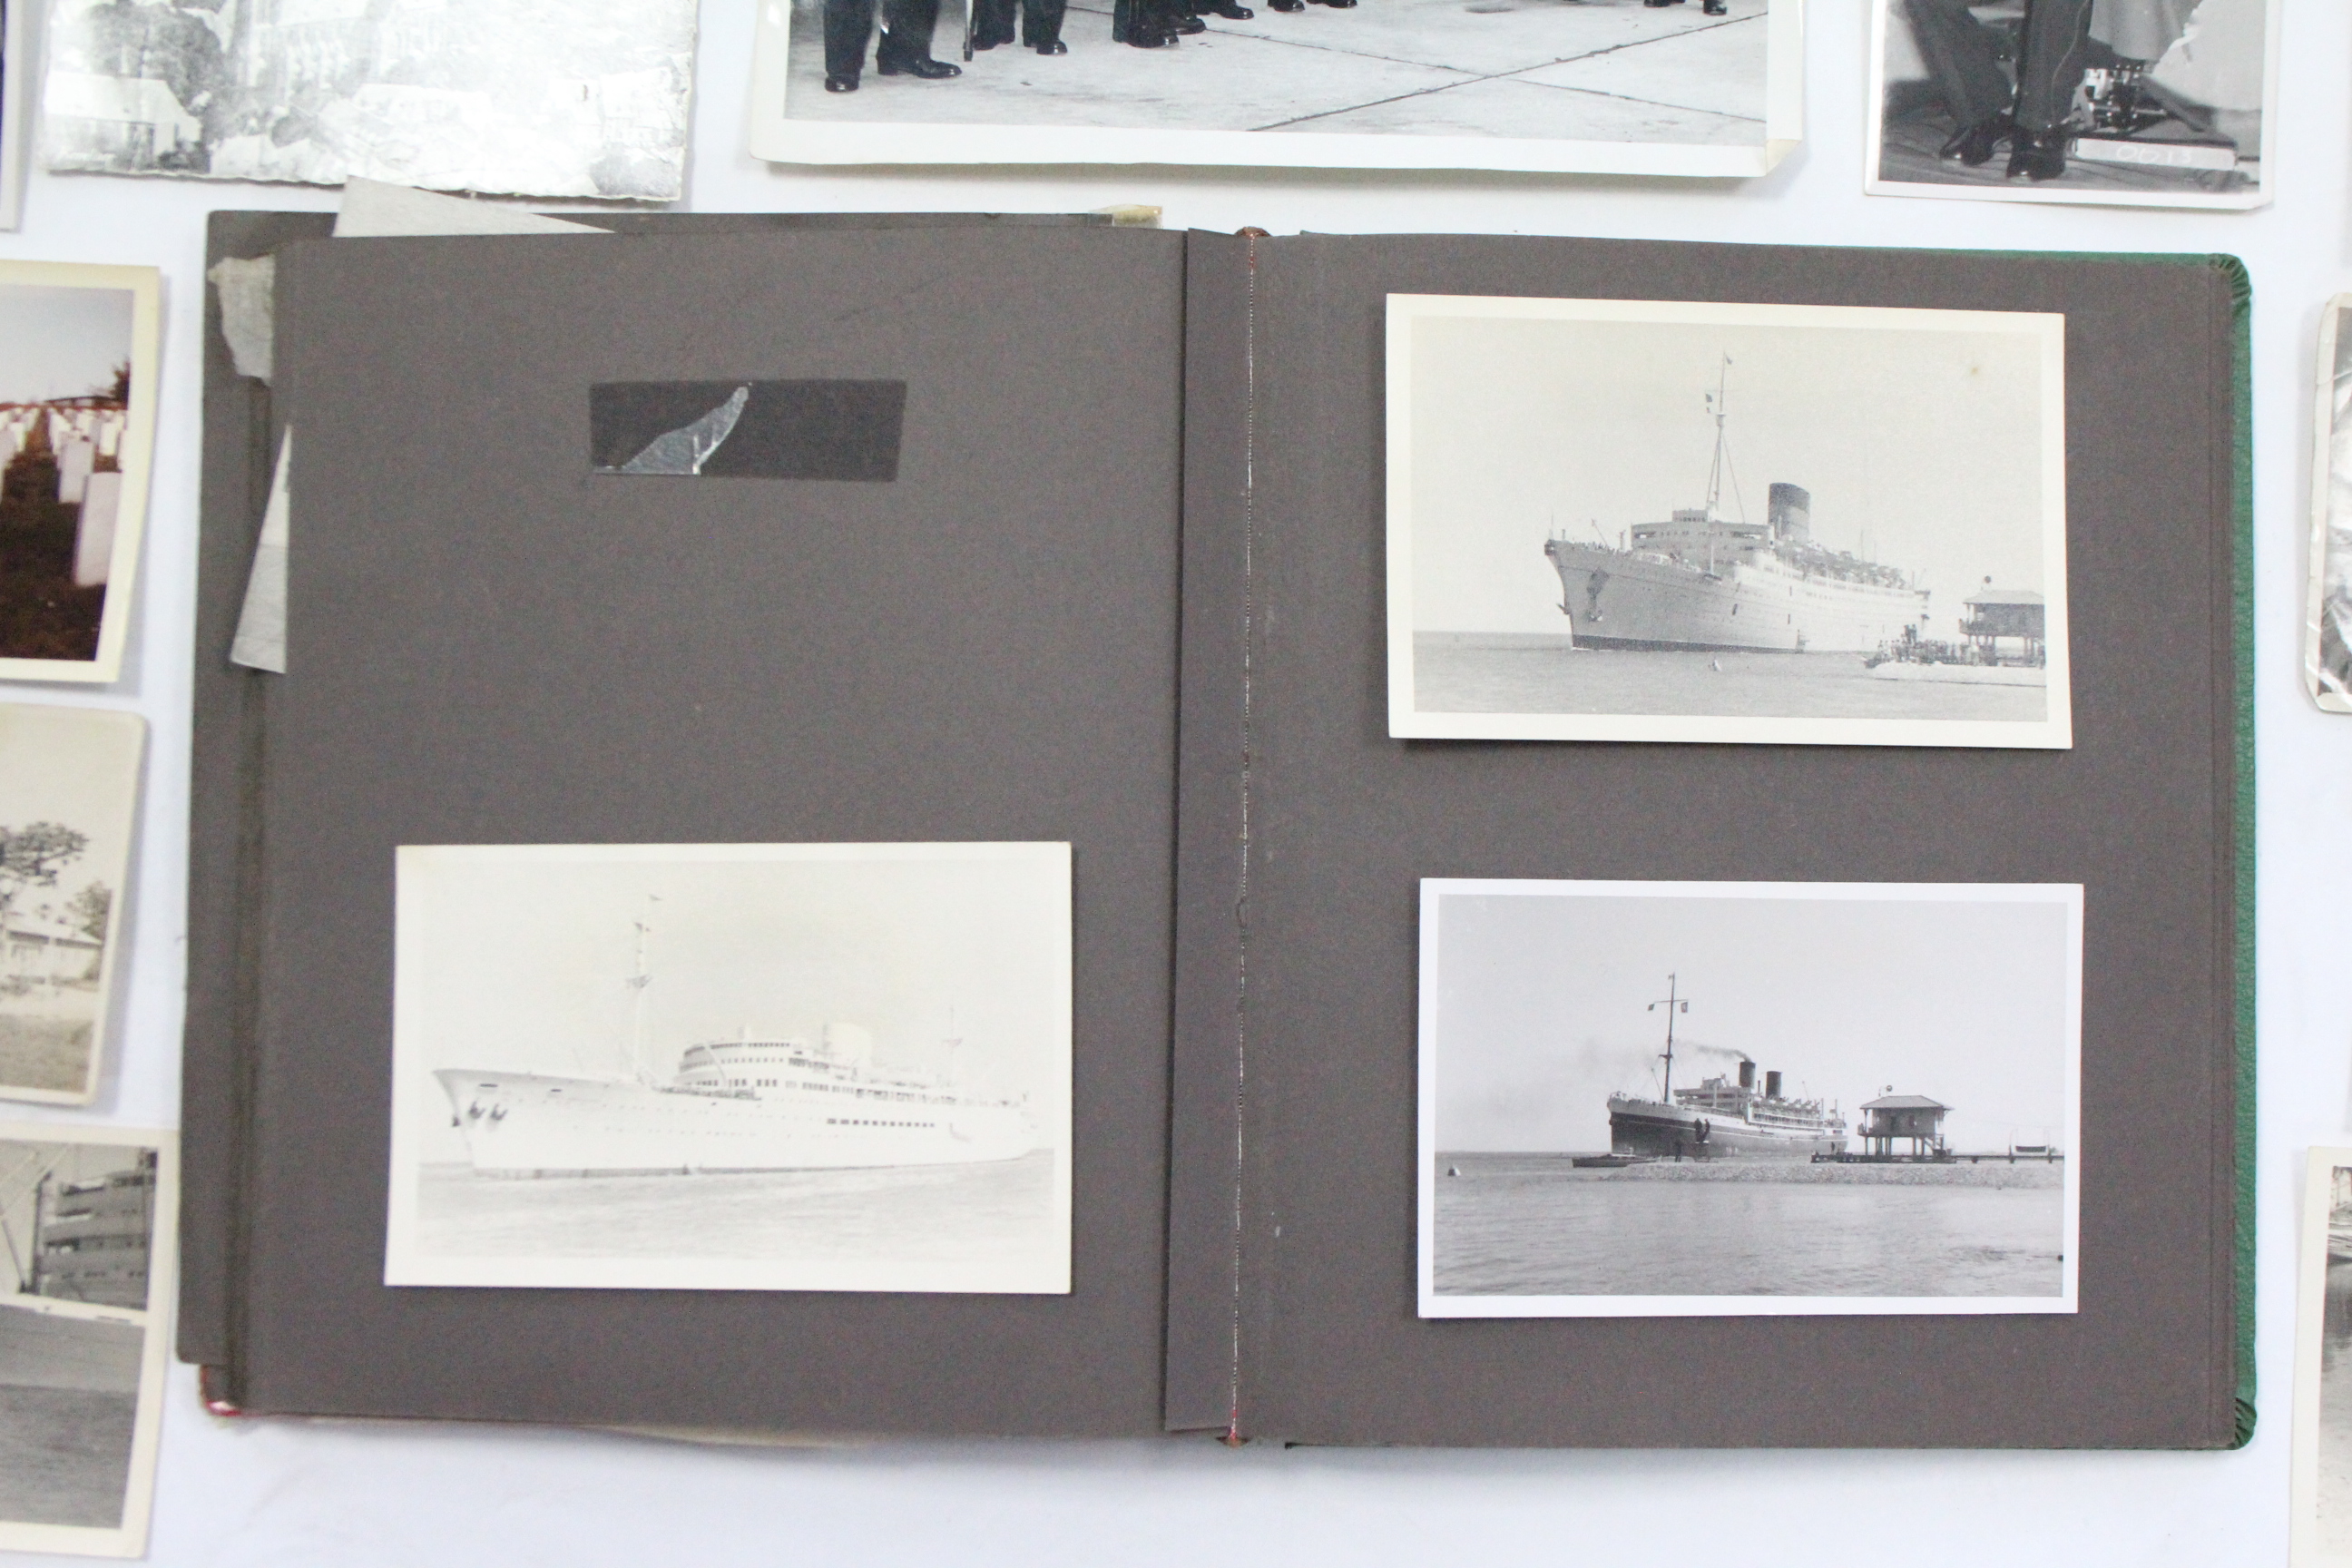 A mid-20th century photograph album containing numerous photographs of aircraft, foreign views, - Image 6 of 6